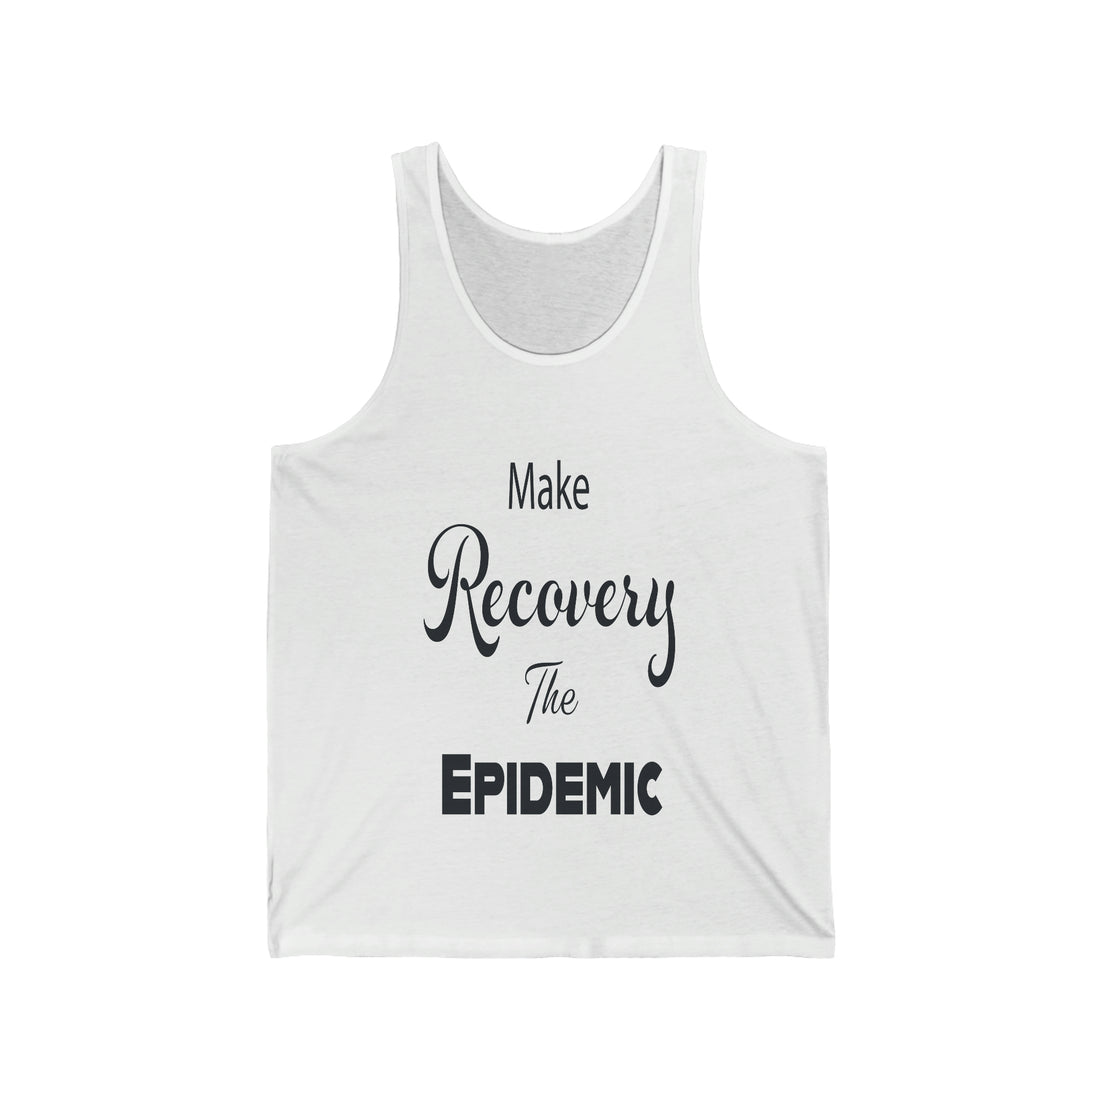 Make Recovery The Epidemic - Unisex Jersey Tank Top